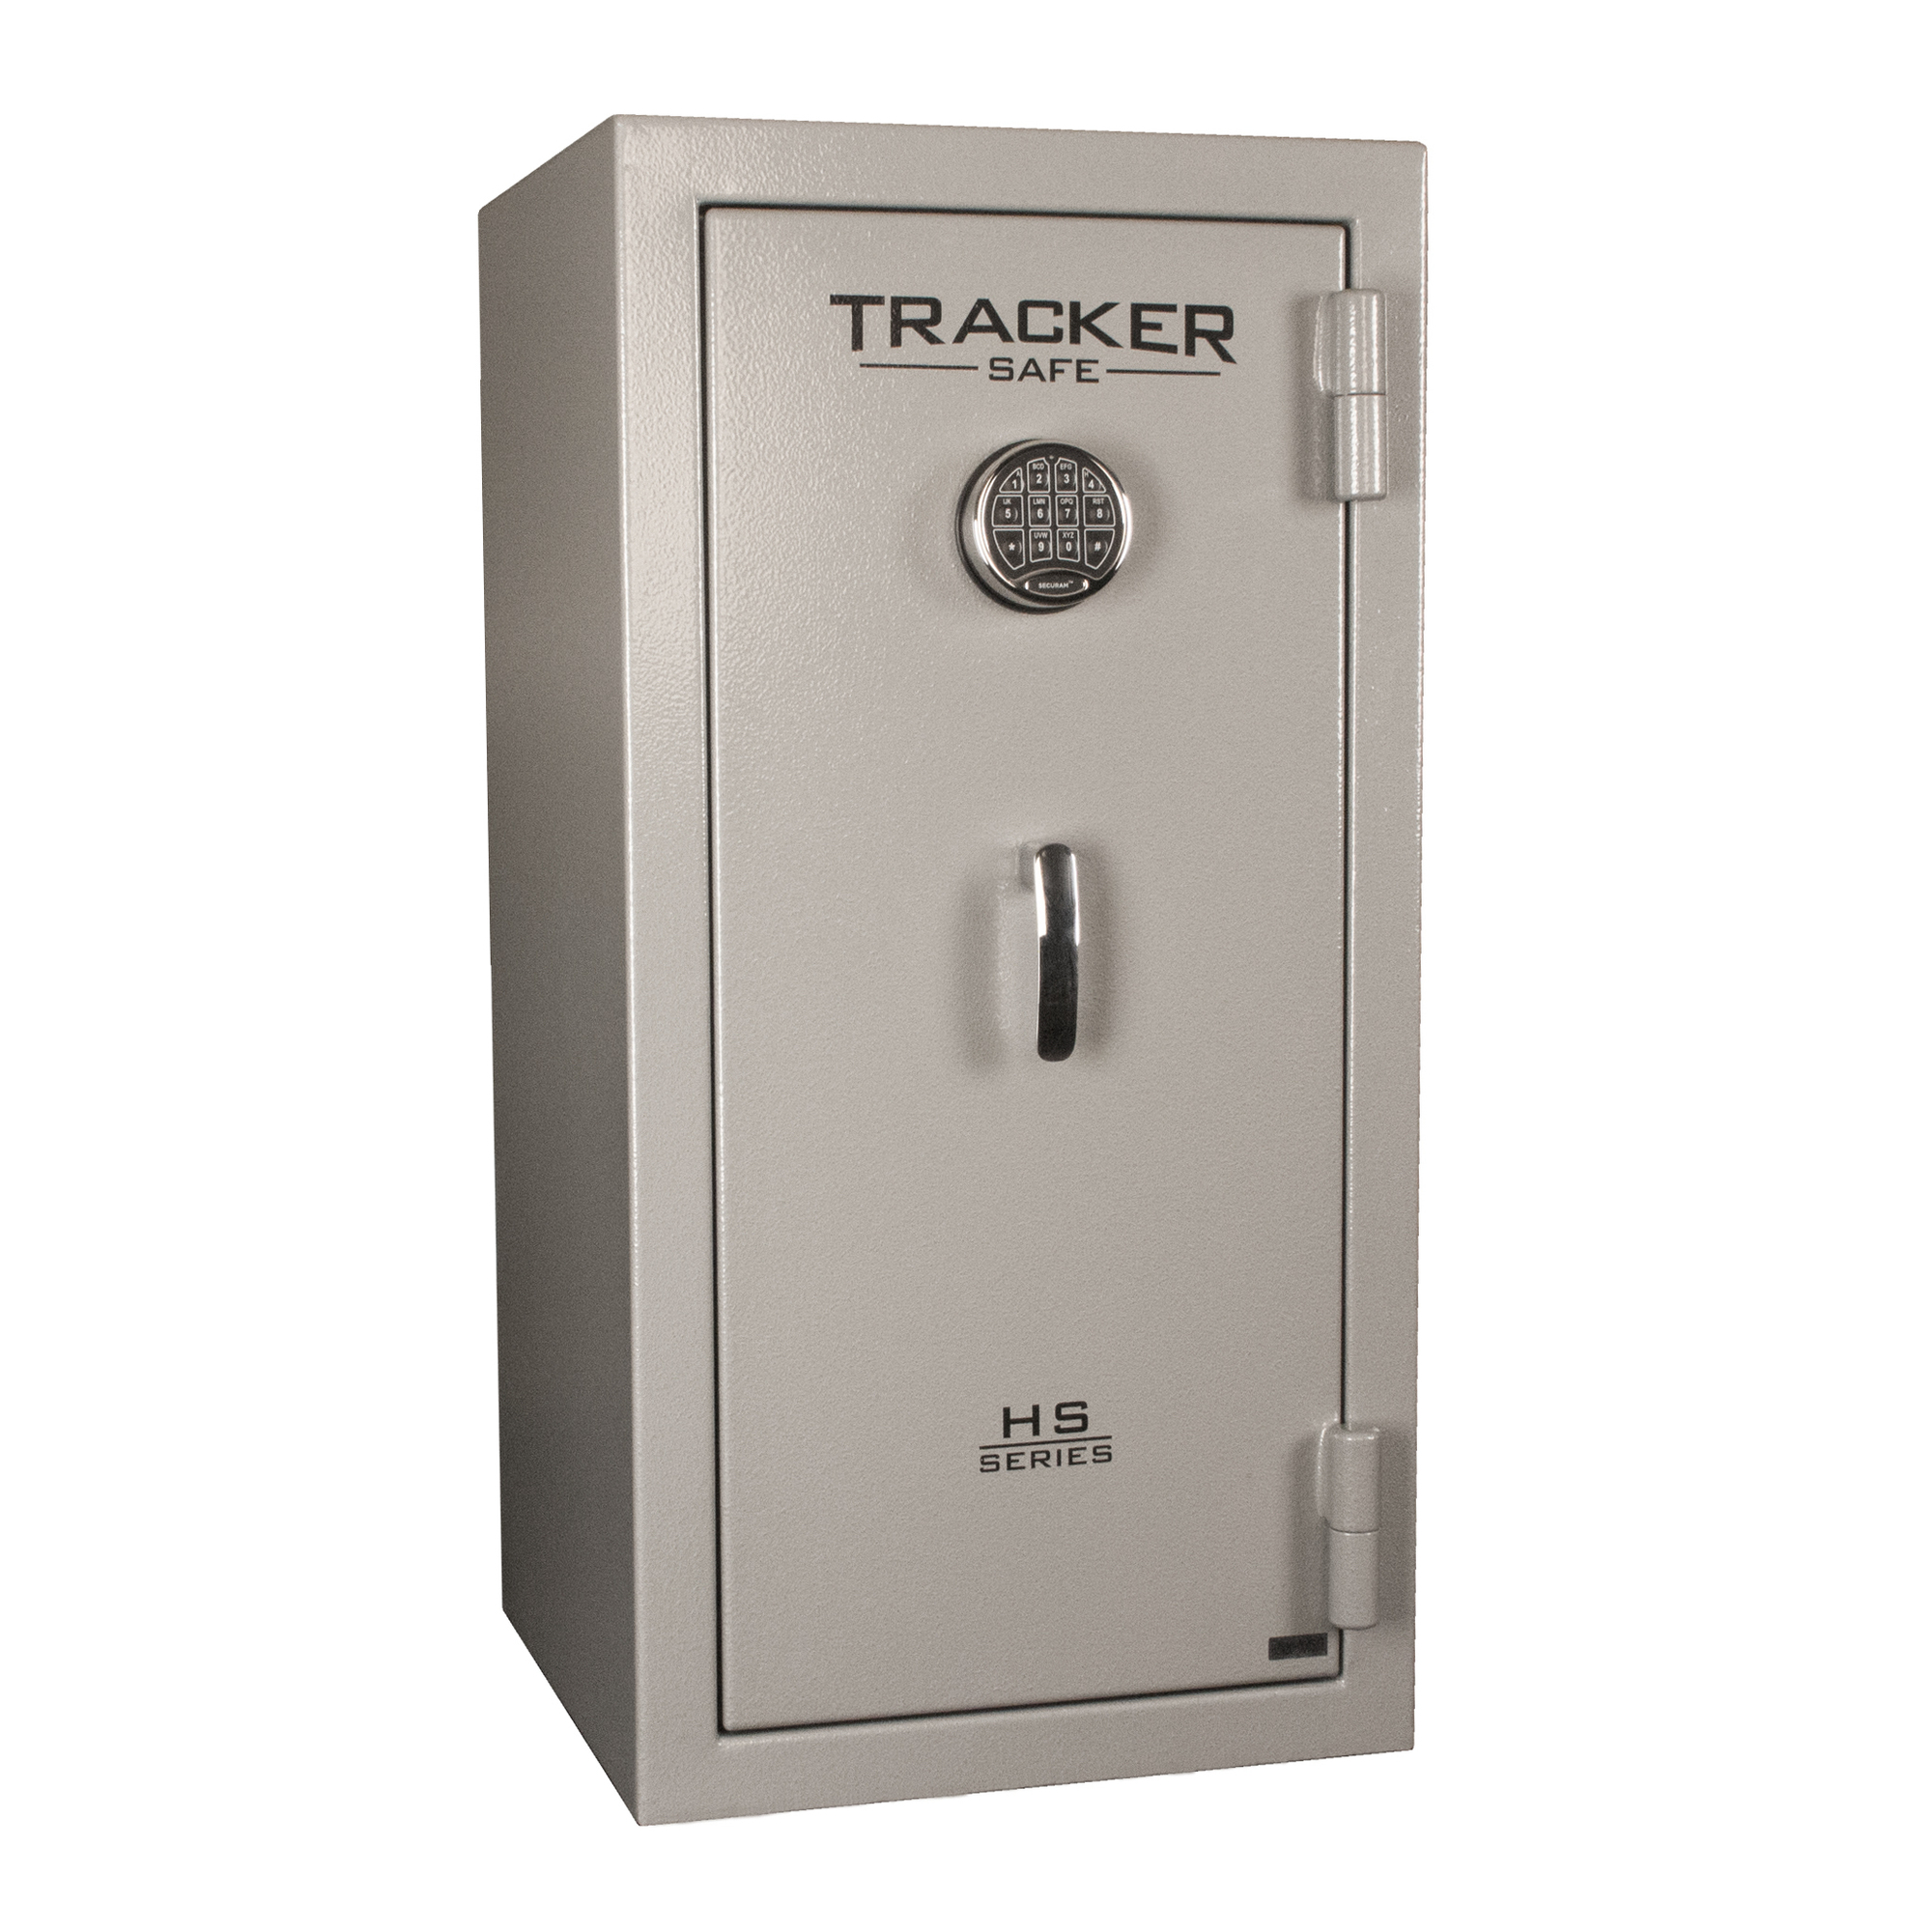 Tracker Safe, 4.8 cu. ft. Fire Resistant Safe, Electronic Lock, Lock Type Electronic, Model HS40